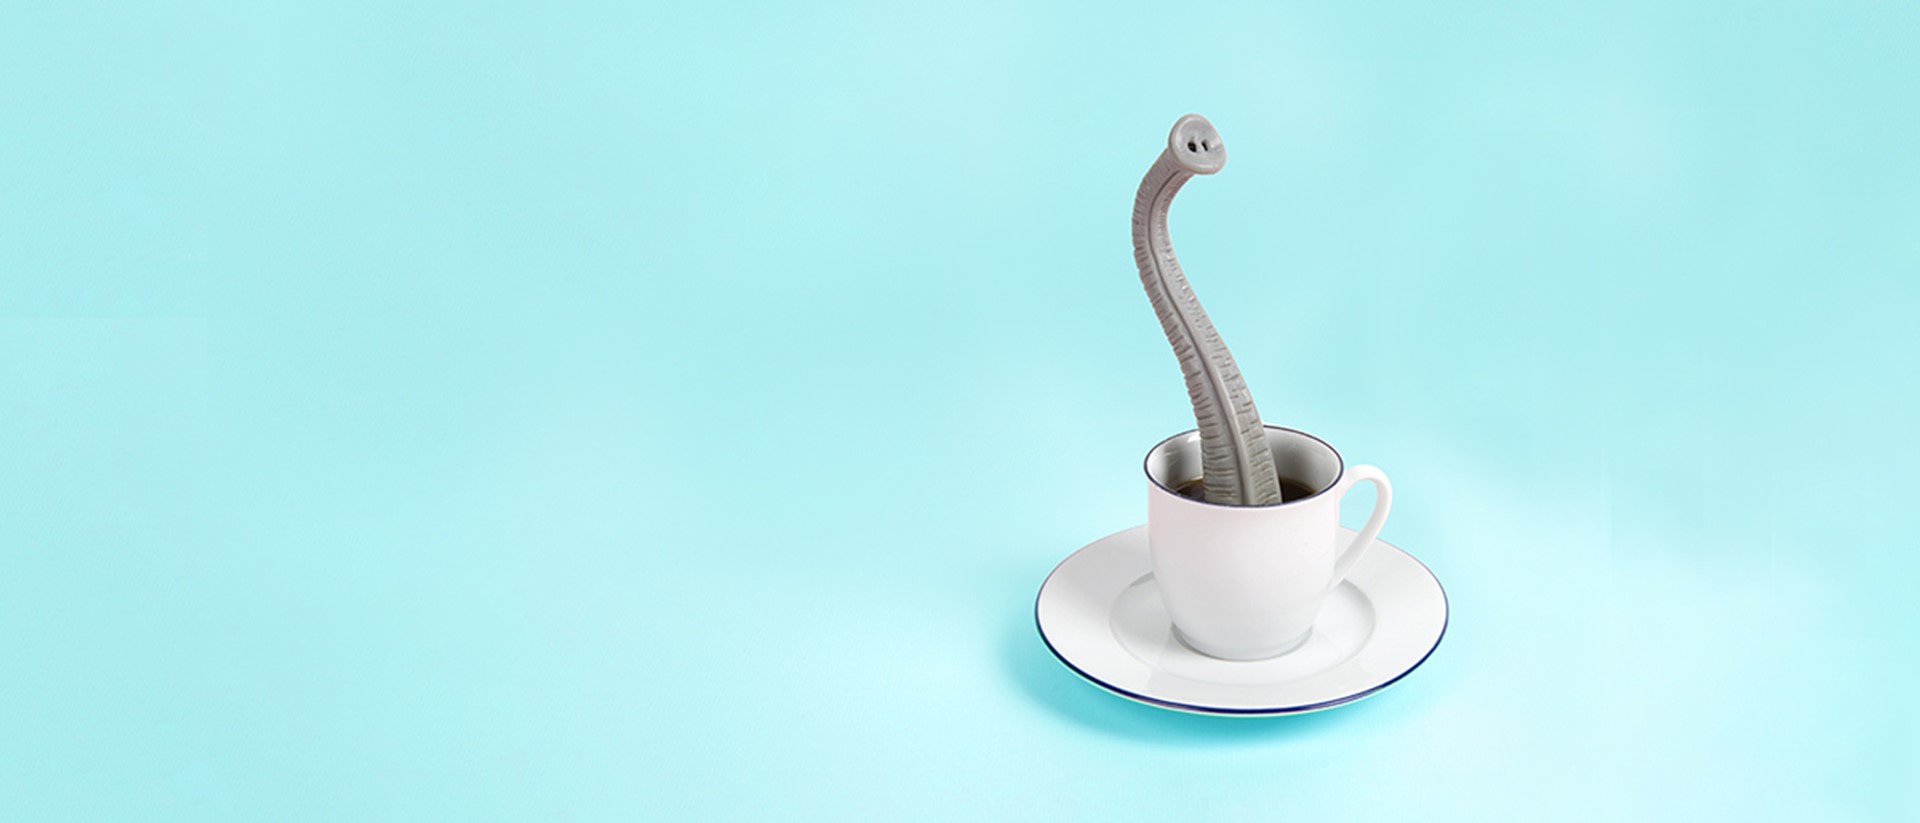 Image of an elephant trunk rising up out of a tea cup on a light blue background